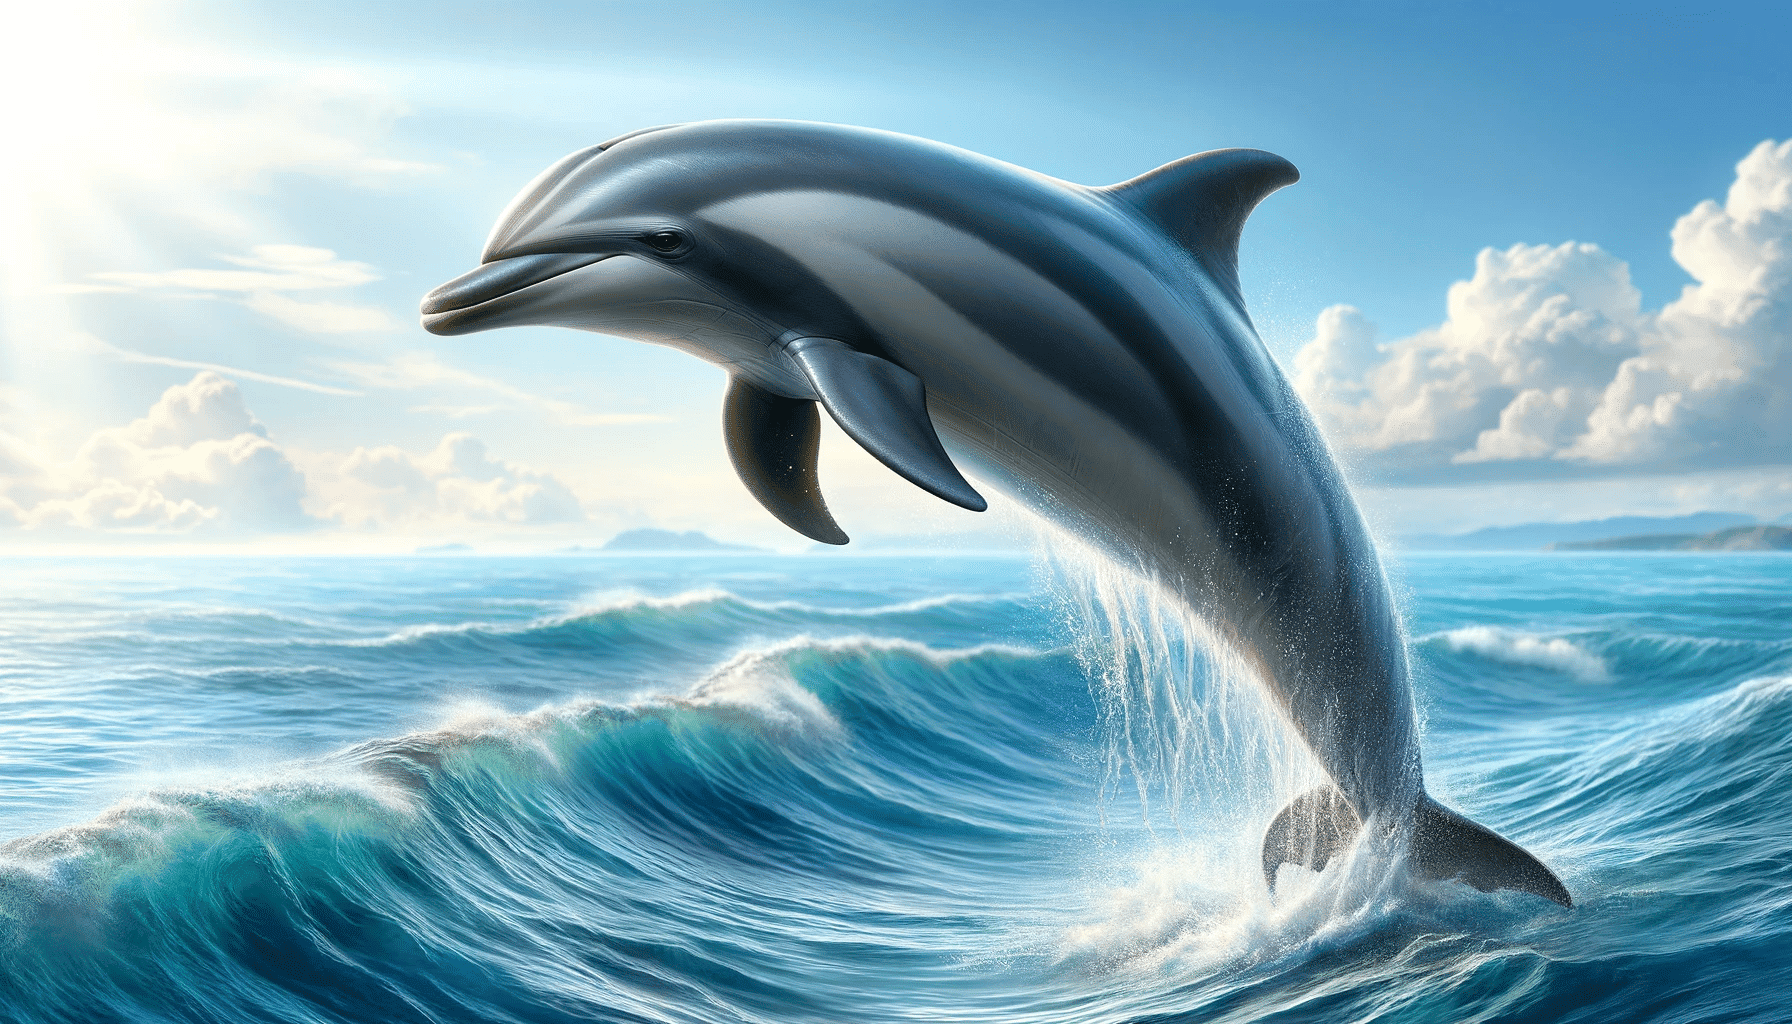 Dolphin breaching the water